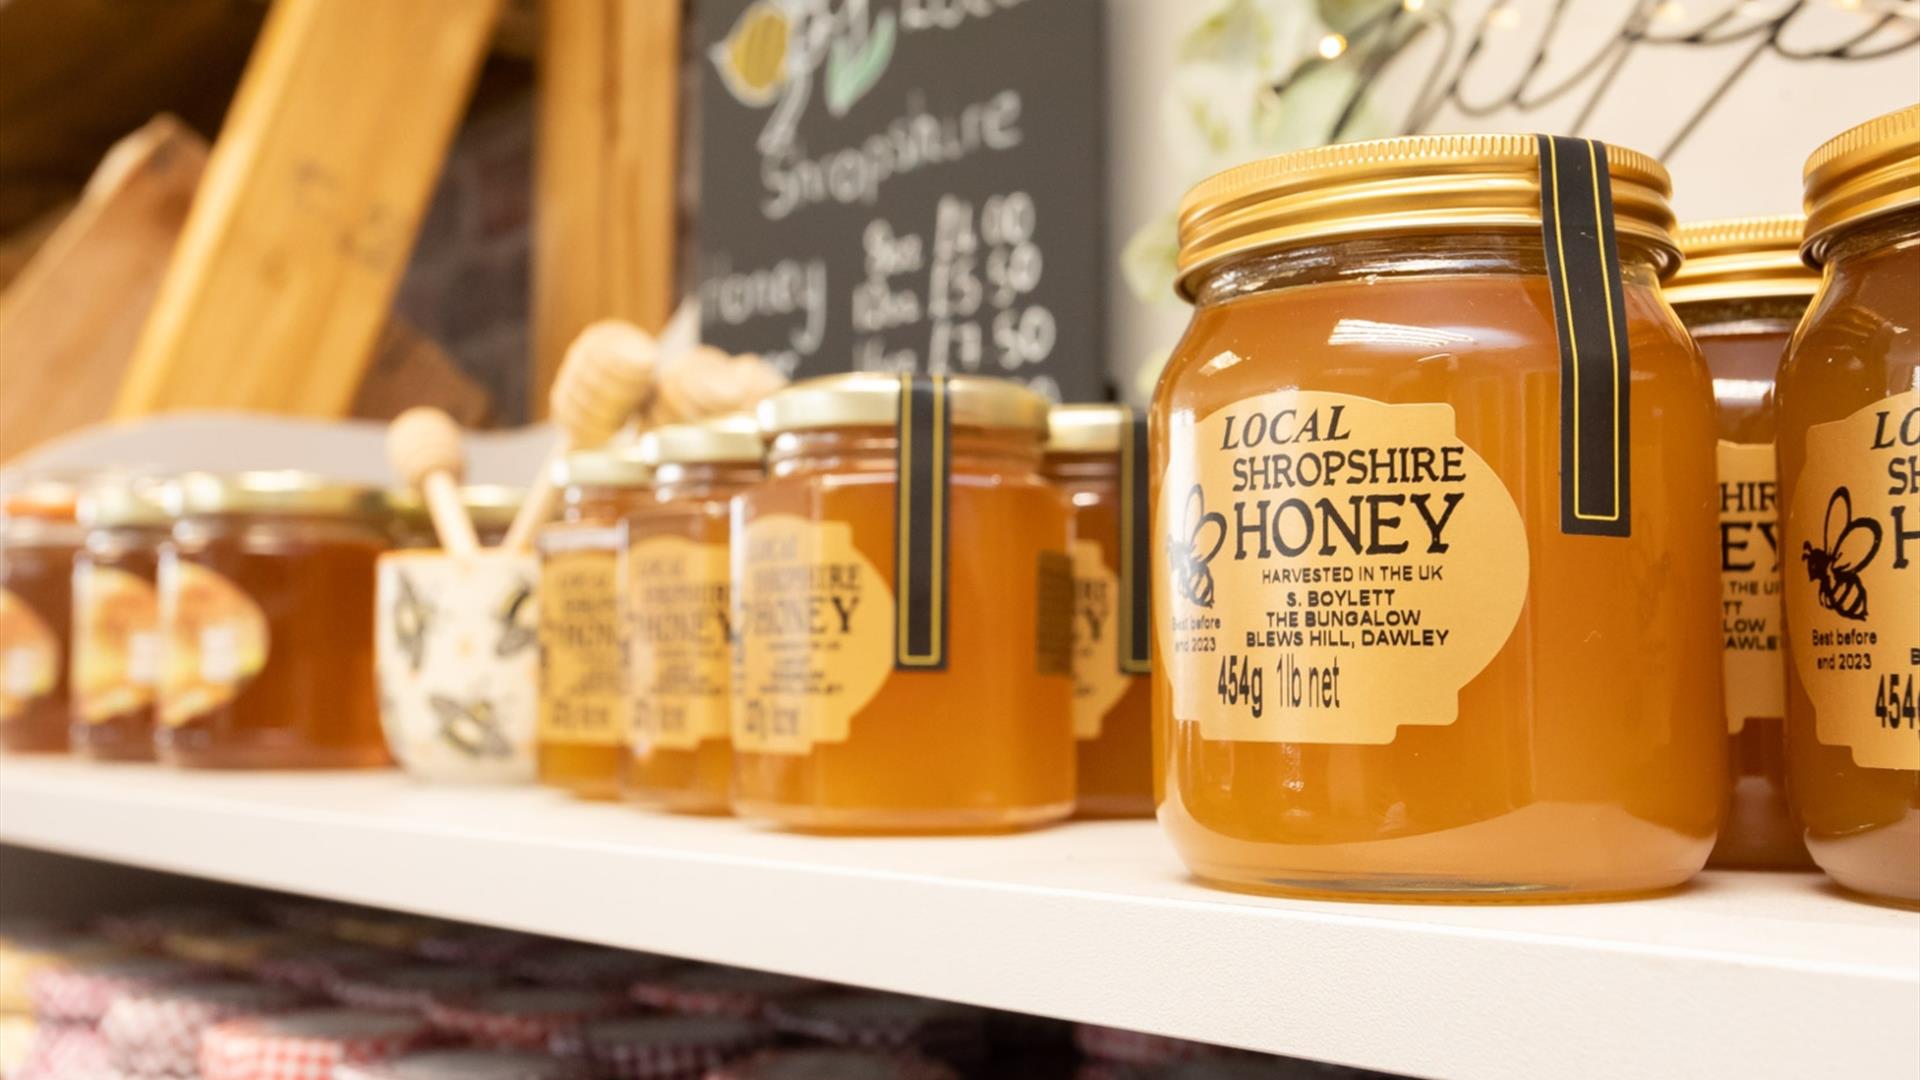 Local honey on display from Dawley in Telford